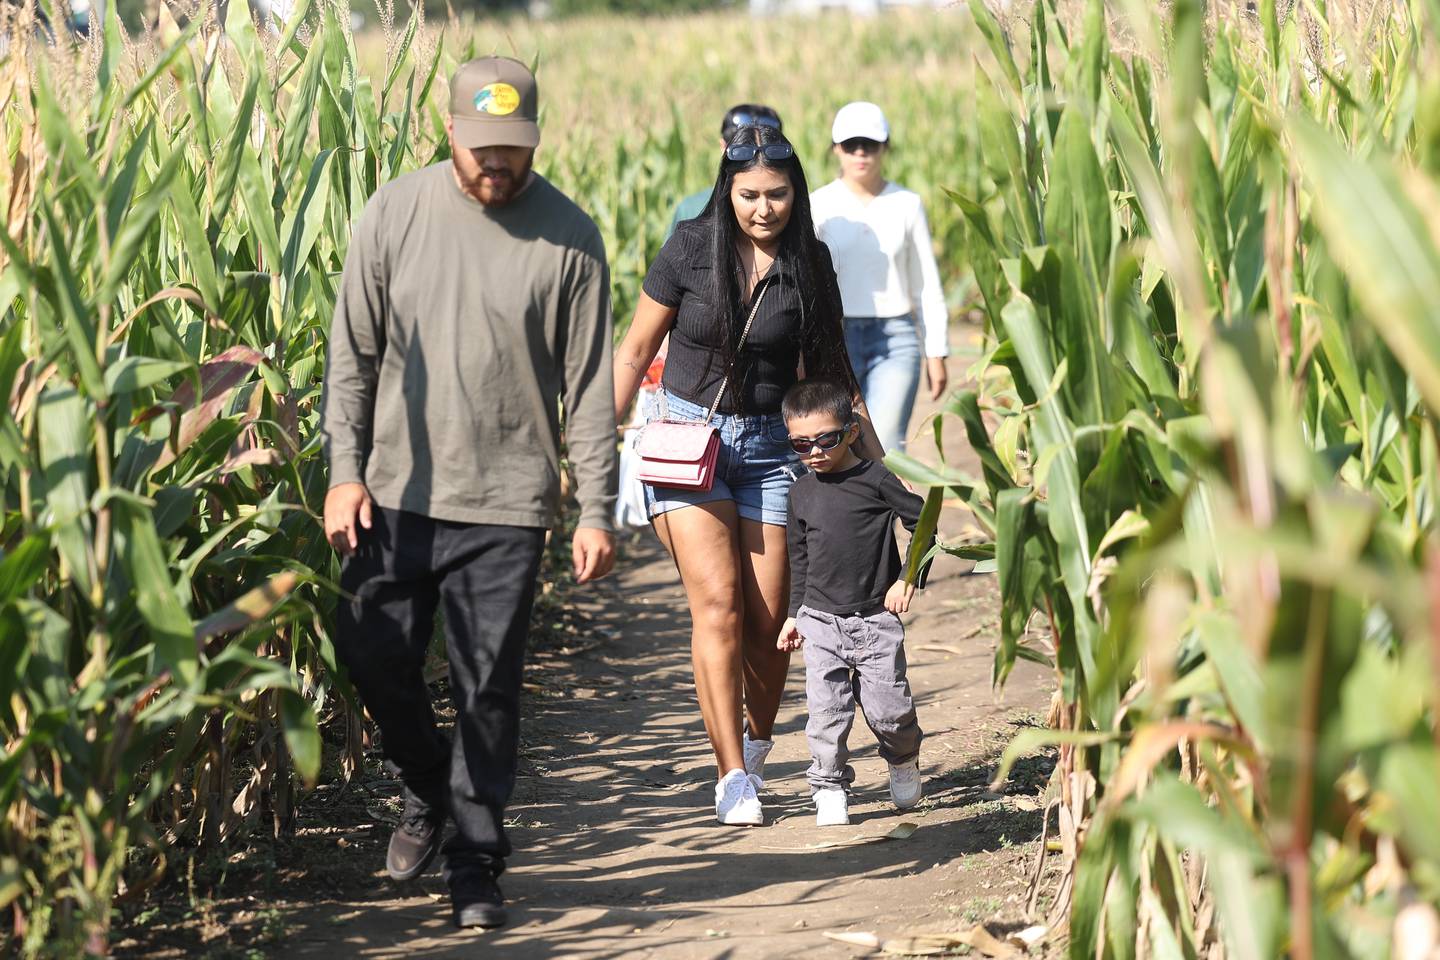 The Esparza family makes their way out of the corn maze at Konow’s Corn Maze on Saturday, Sept. 30, 2023 in Homer Glen.